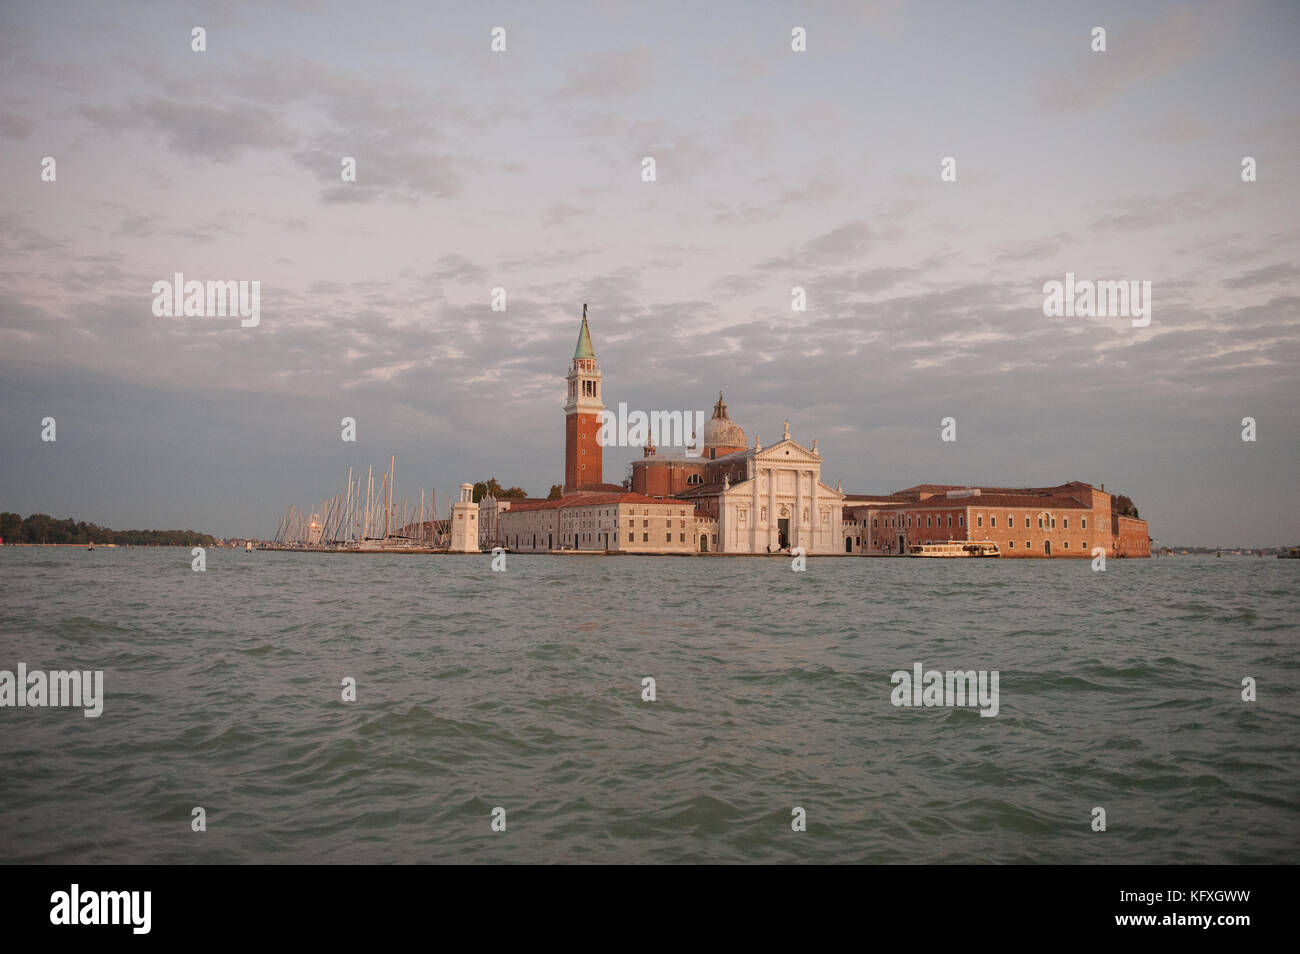 San giorgio and dusk - maggiore Alamy images at photography hi-res stock